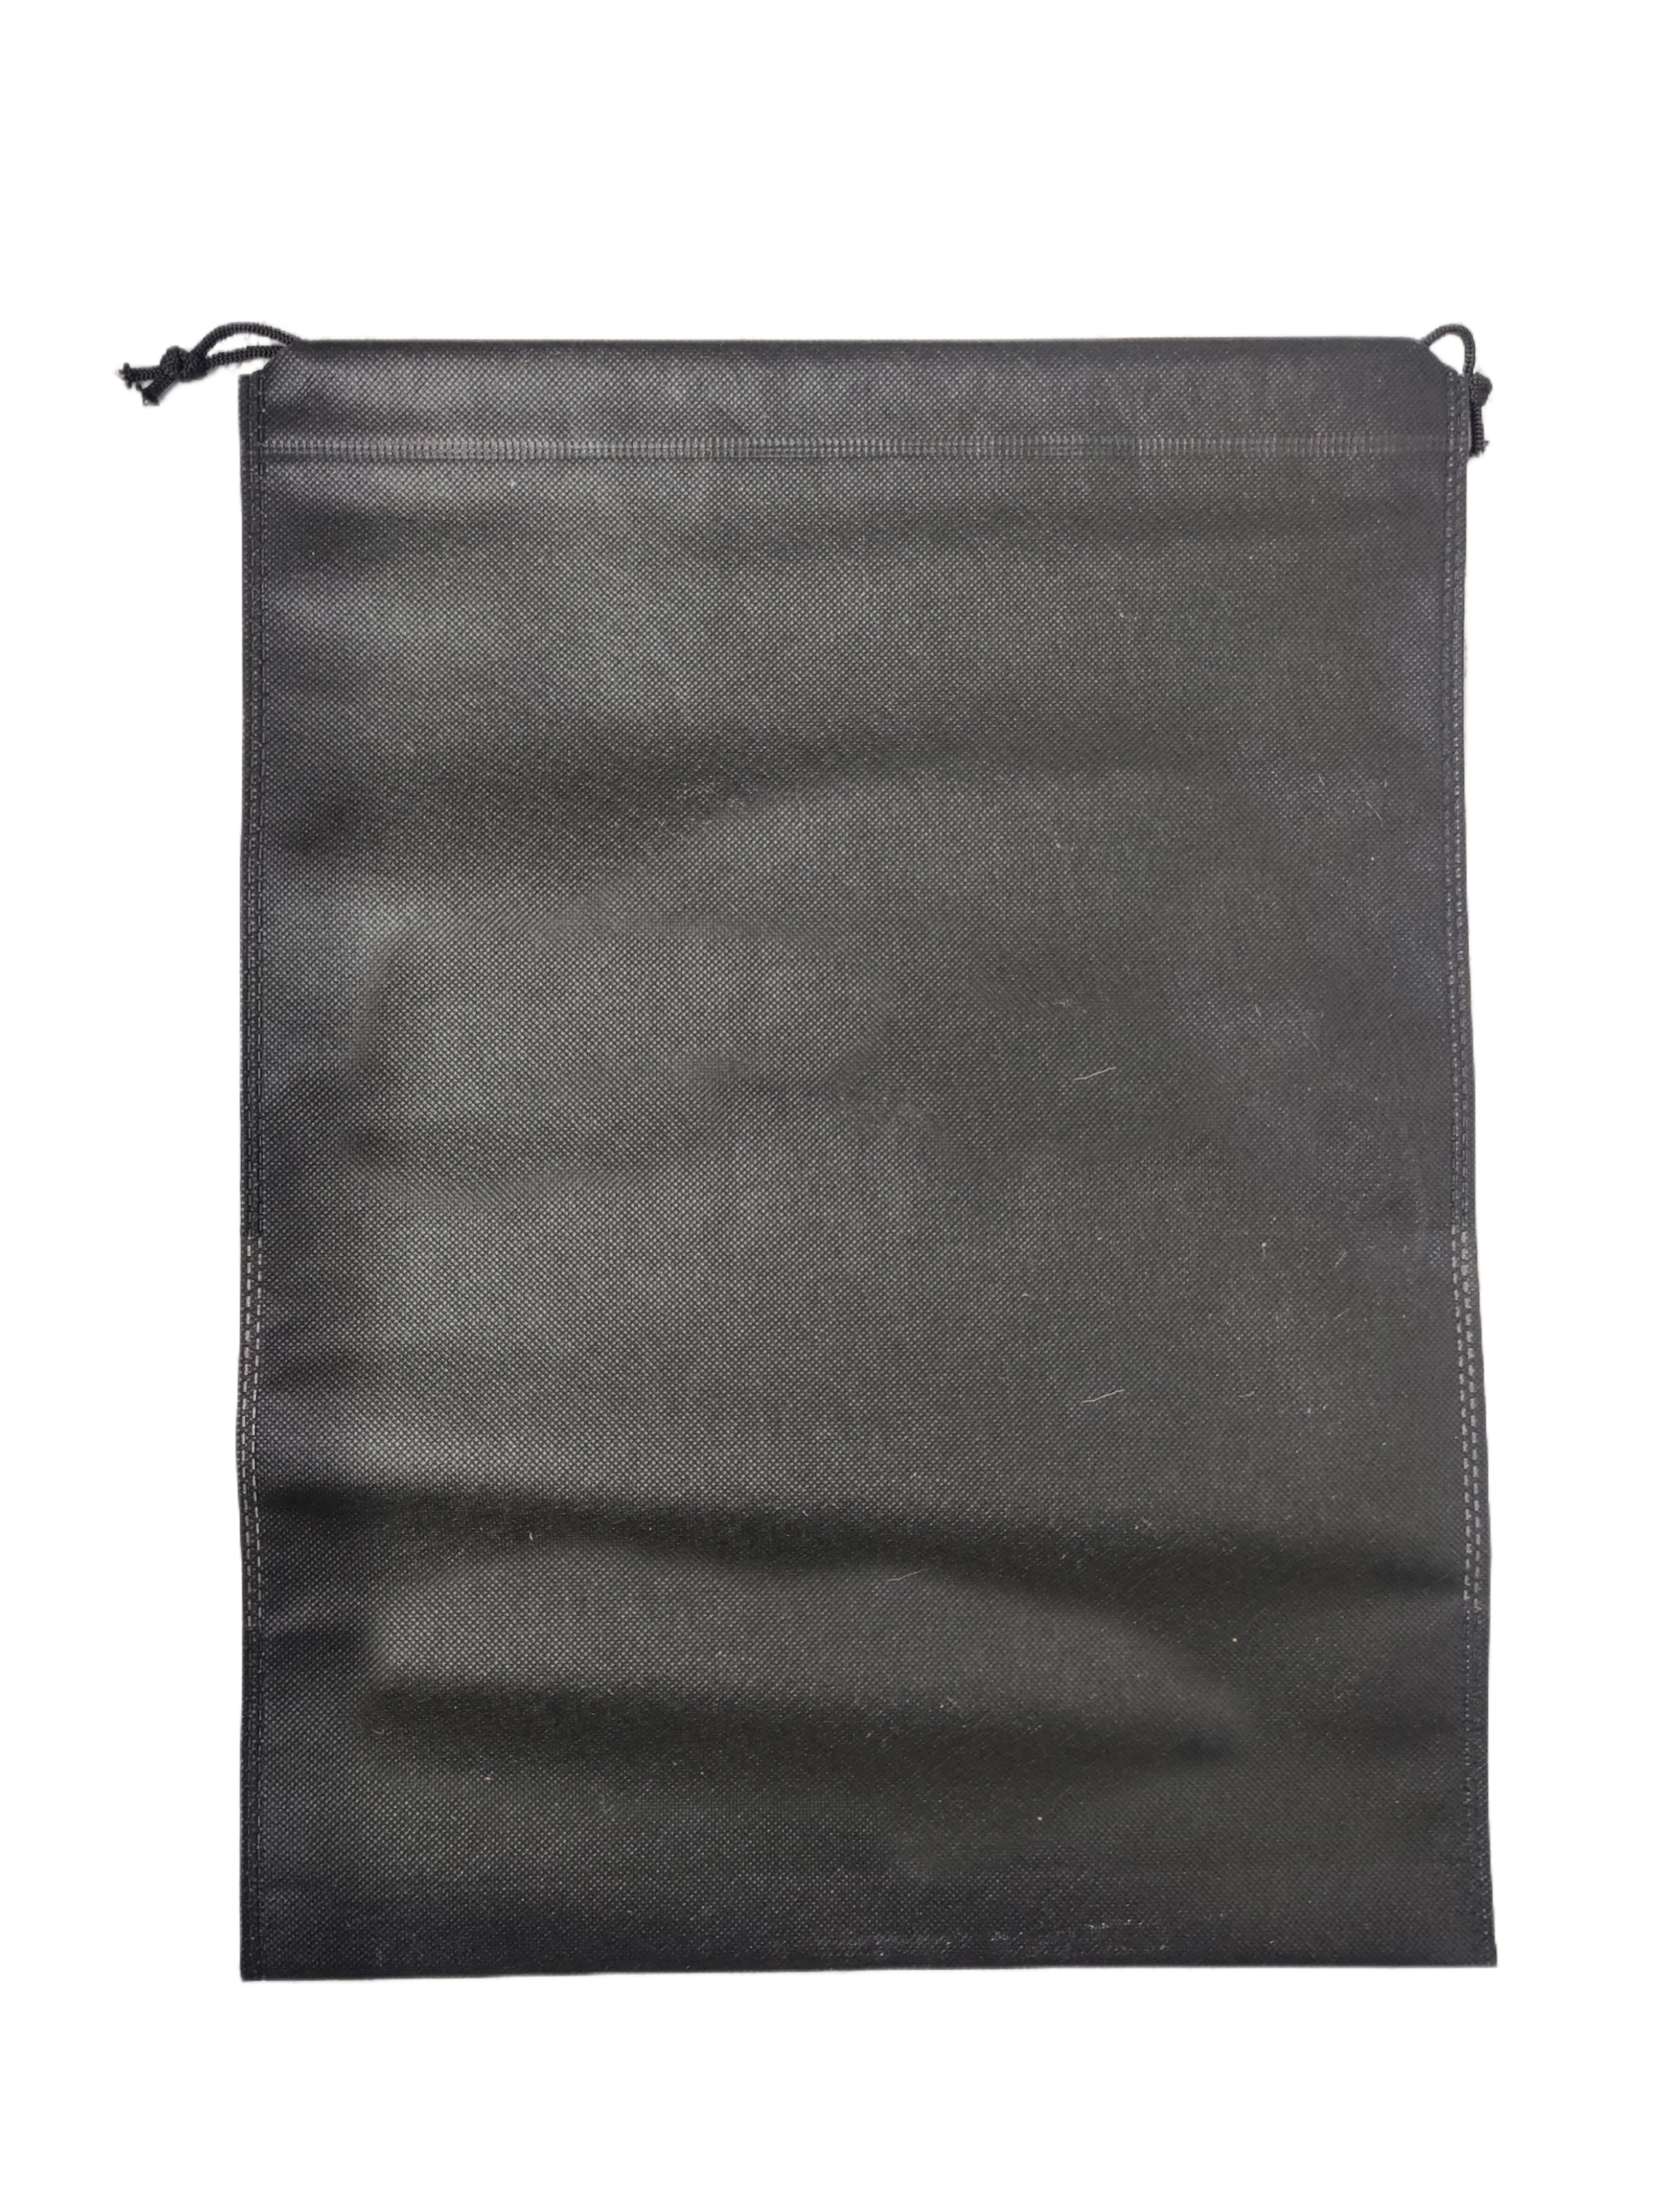 Non woven Shoe Bag Black with Transparent Window 12 by 16 inch